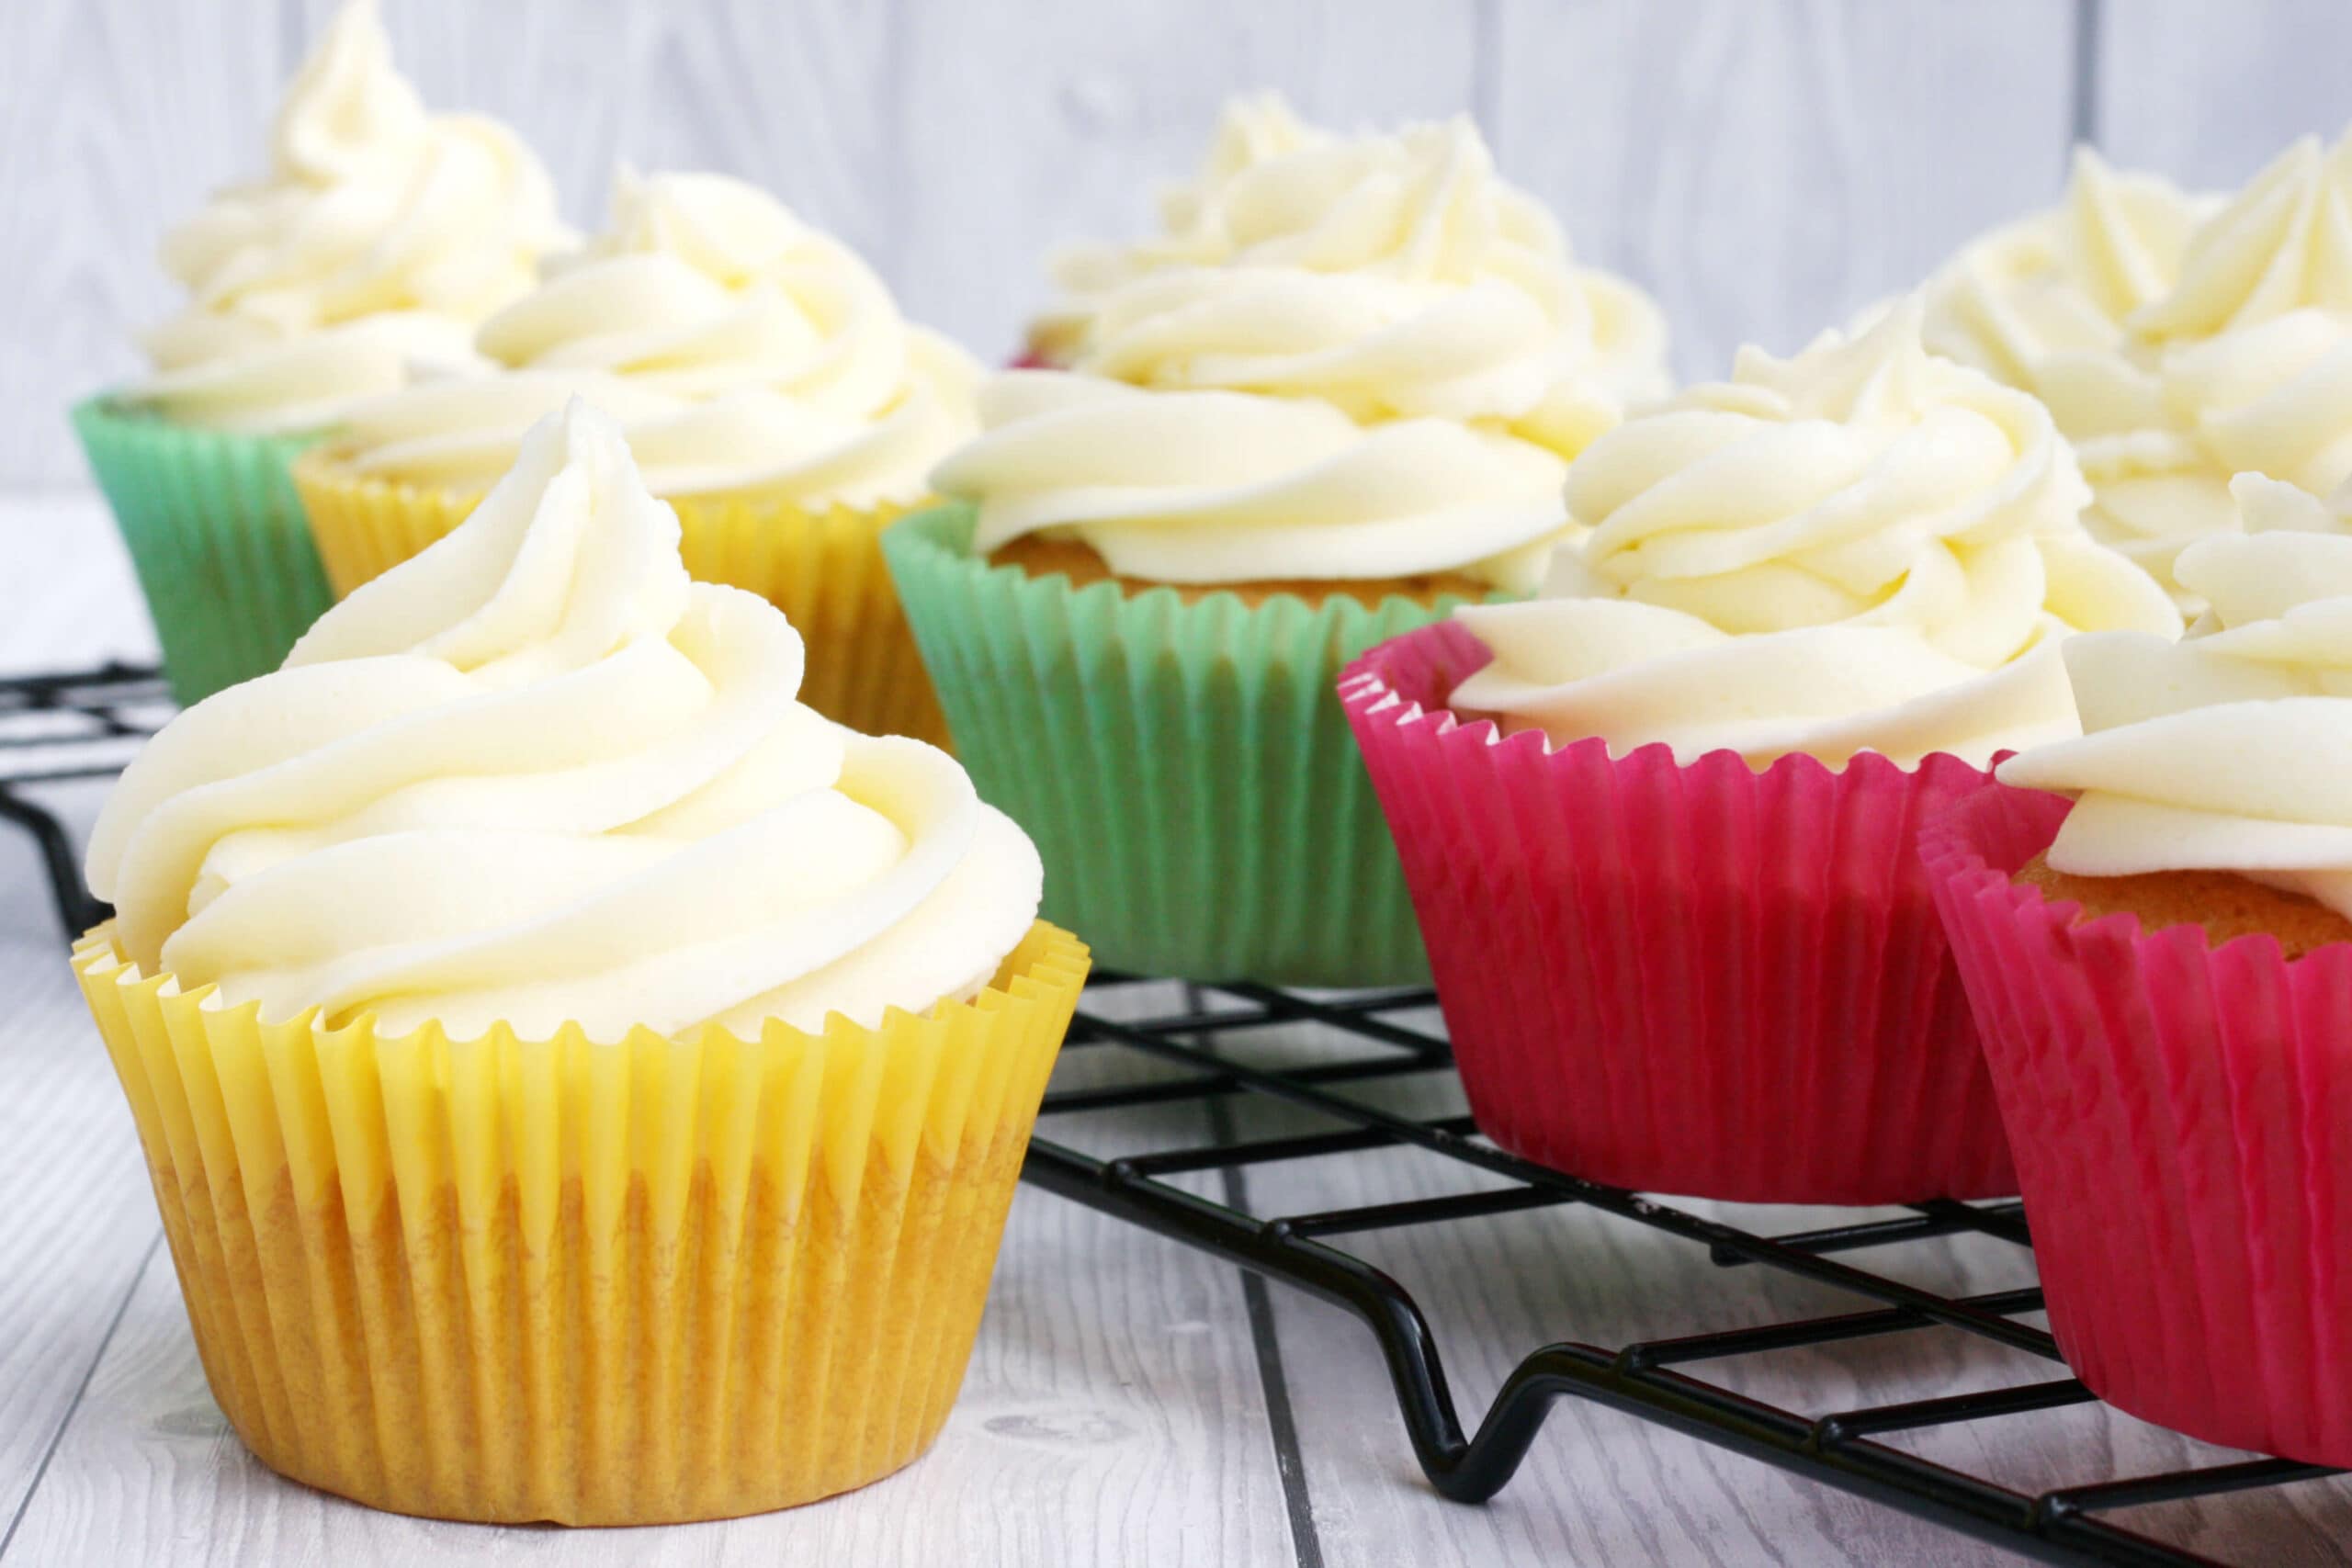 Tips for How to Make Homemade Cupcakes